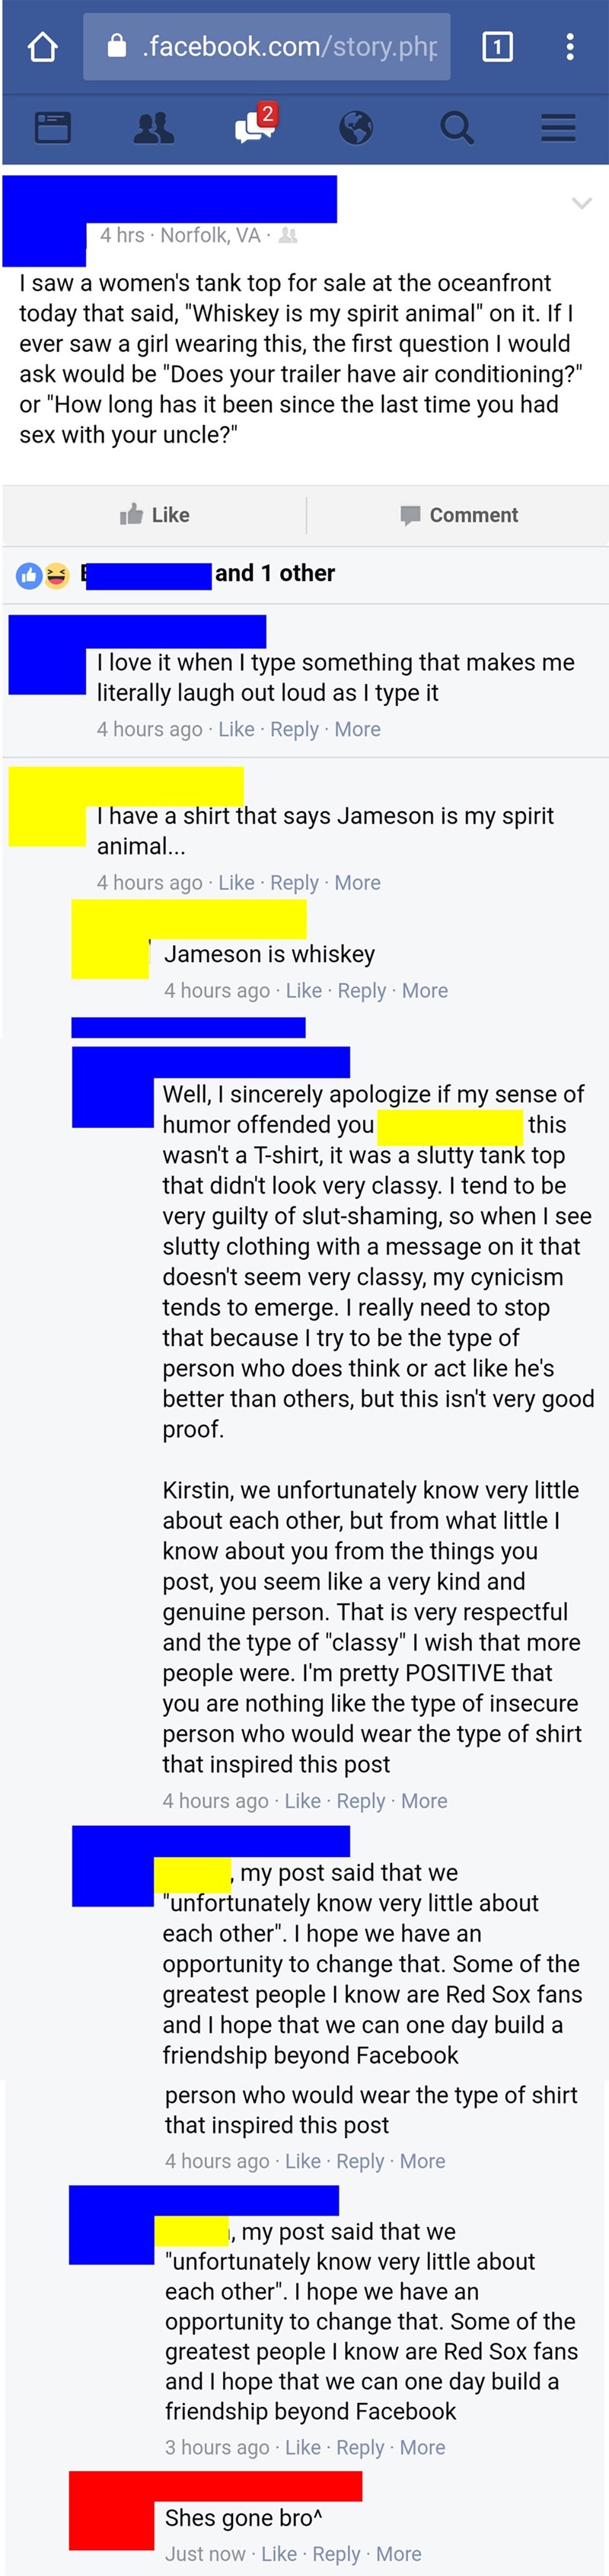 guy makes a cringey post about girls who wear whiskey t-shirts and then backpedals when a girl responds 